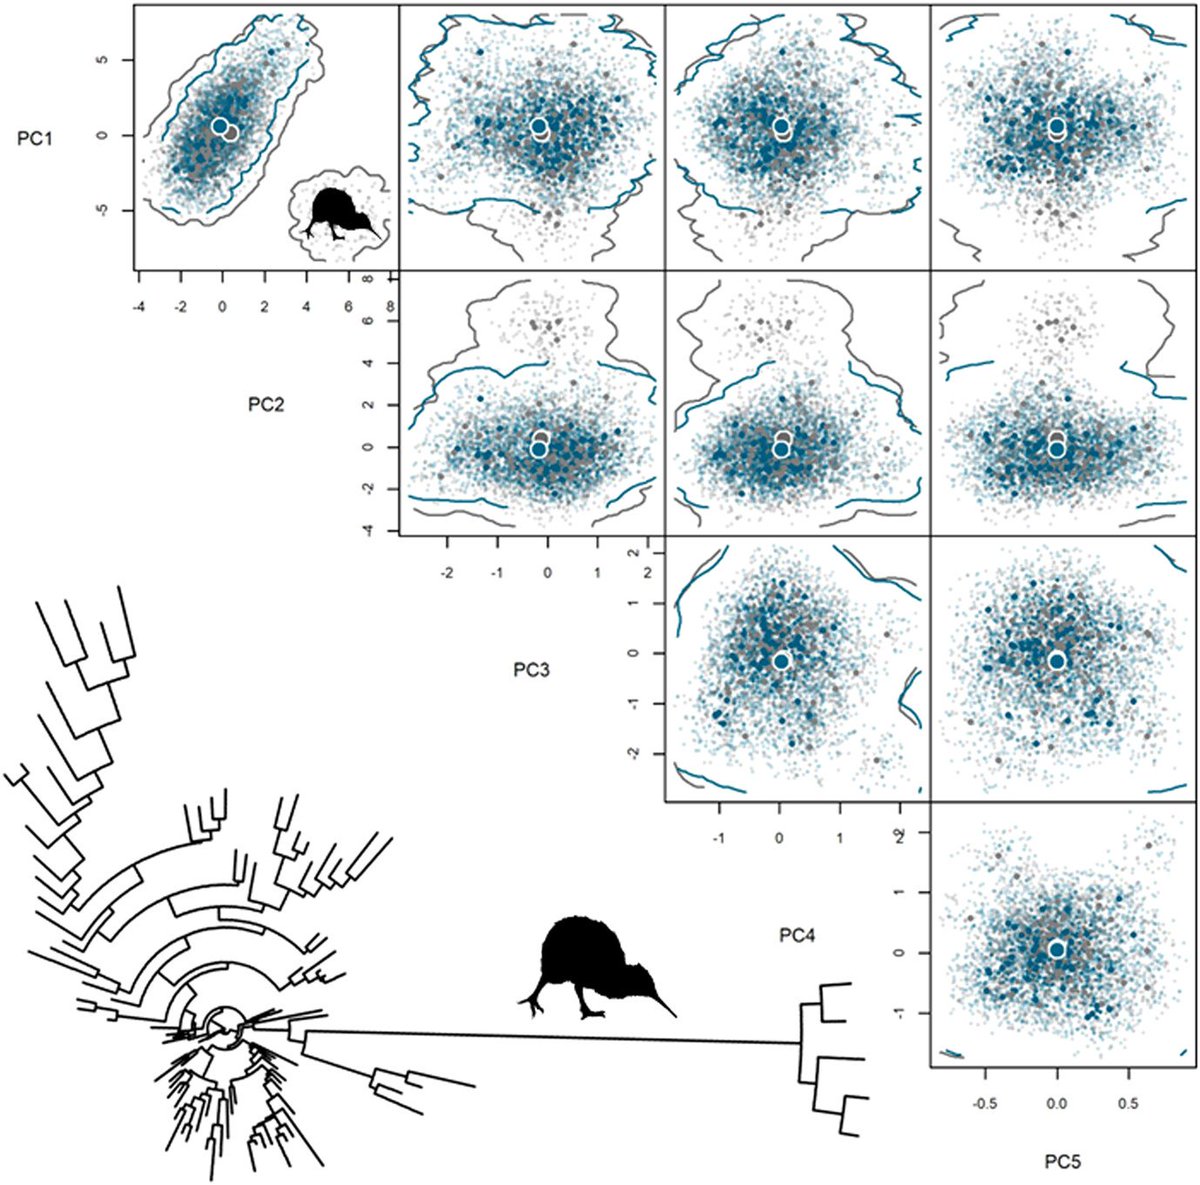 Multiple frameworks have been proposed to quantify #Functional #Diversity across its dimensions, including richness, divergence, regularity and turnover (beta diversity). In a new paper @EcographyJourna we propose using neighbor-joining trees. doi.org/10.1111/ecog.0…